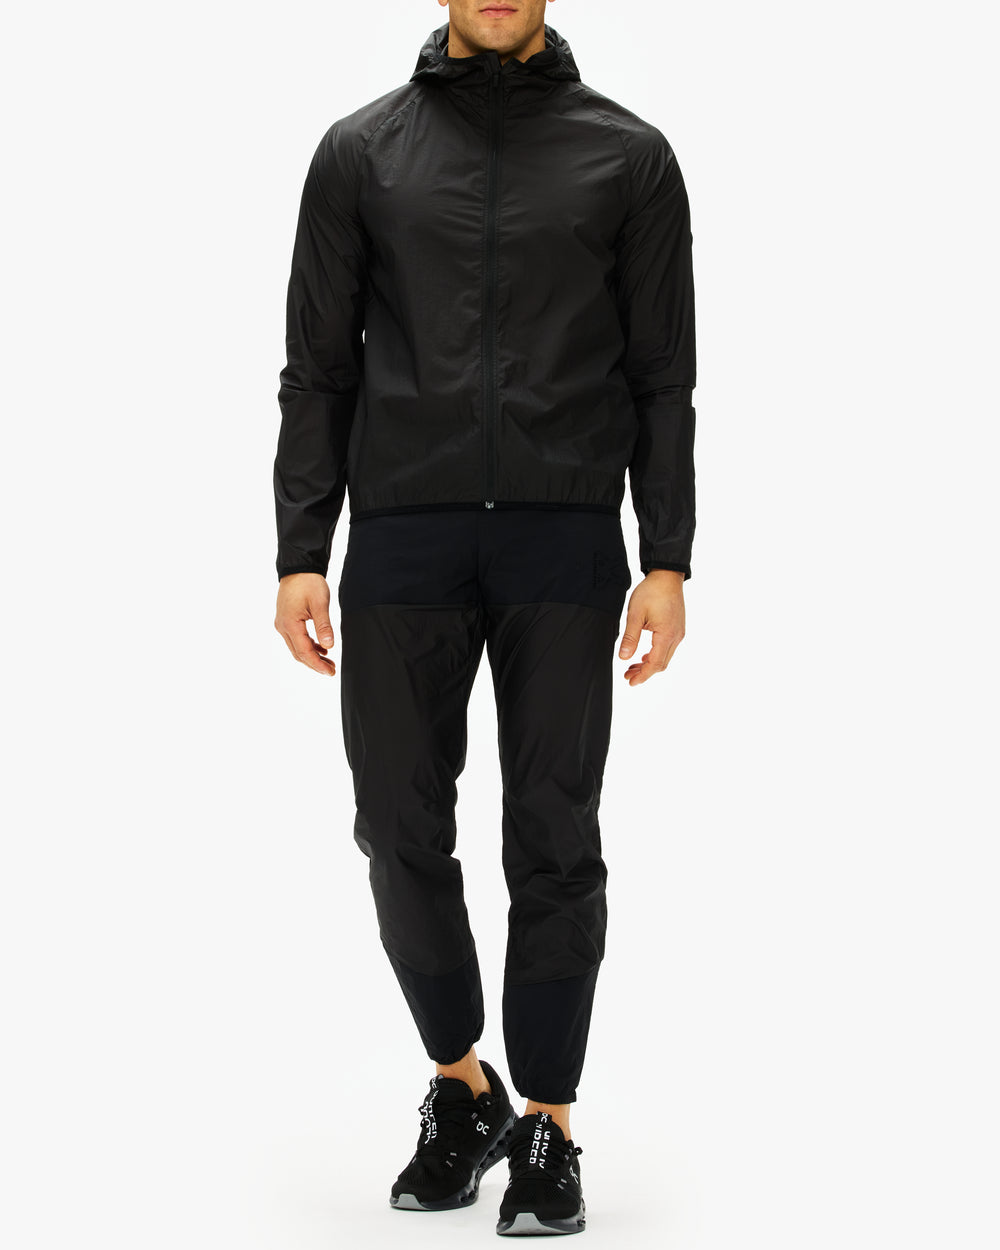 District Vision Ultralight Packable Dwr Wind Jacket